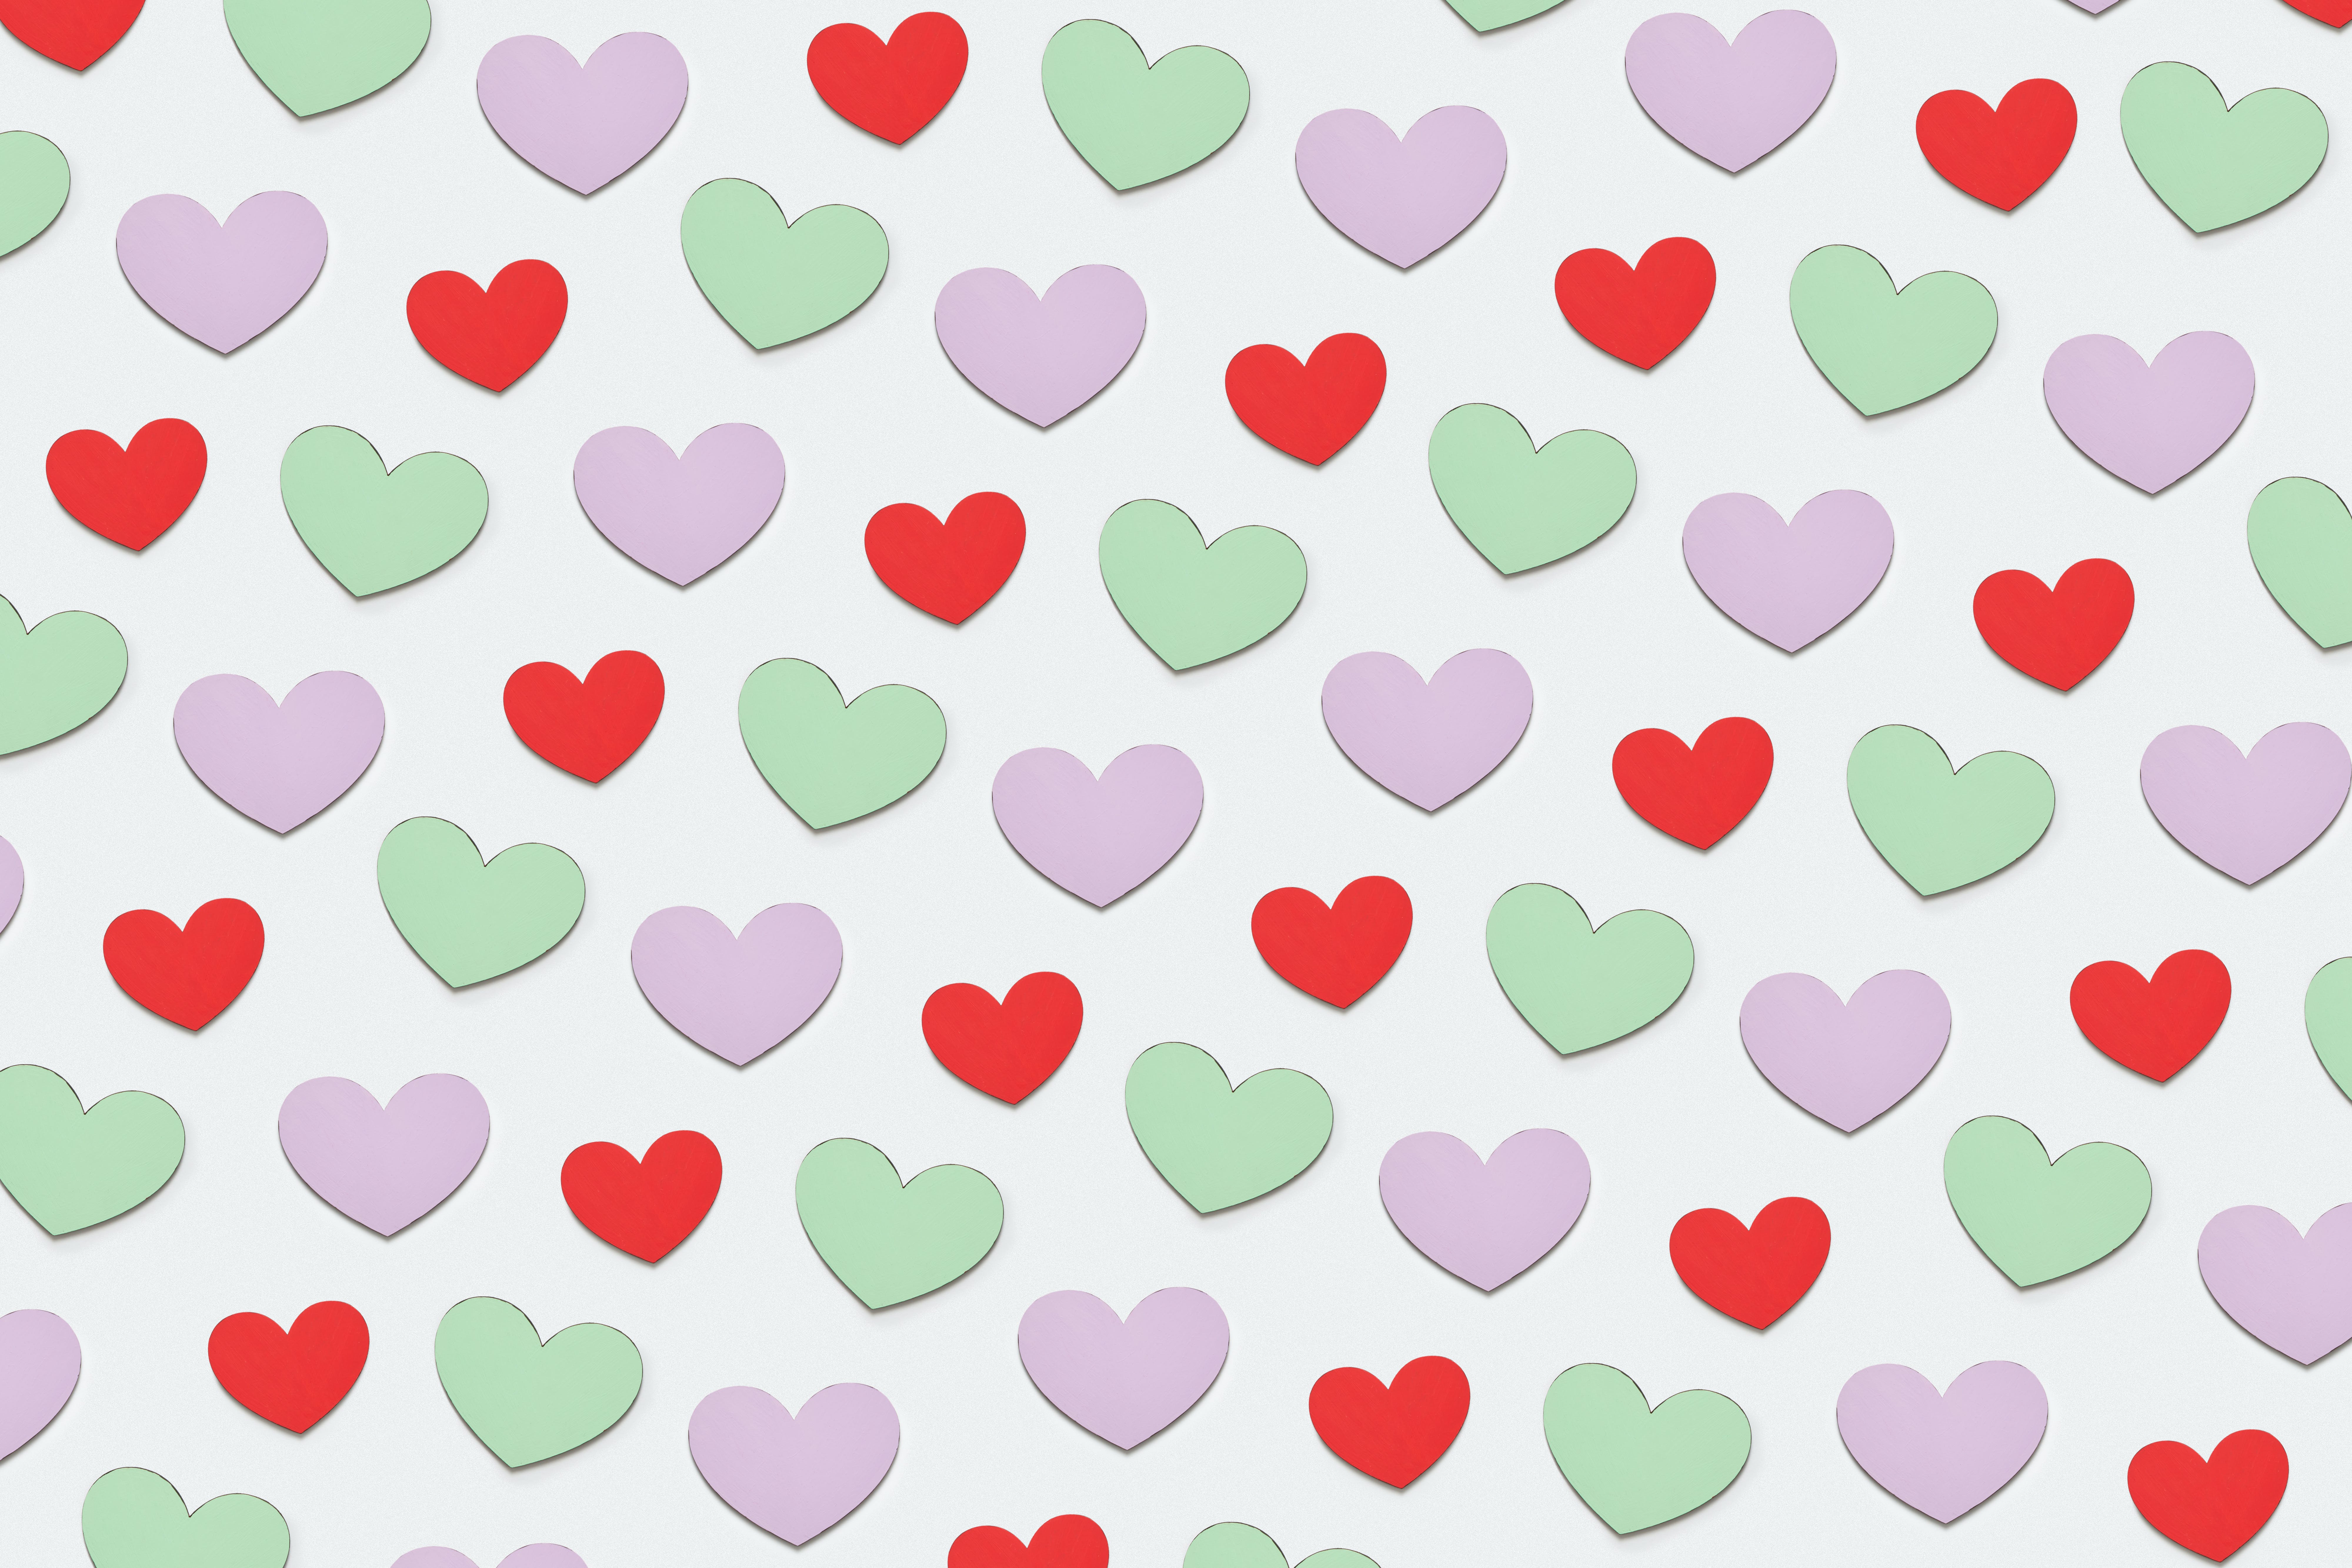 Pink, red, and green paper hearts.